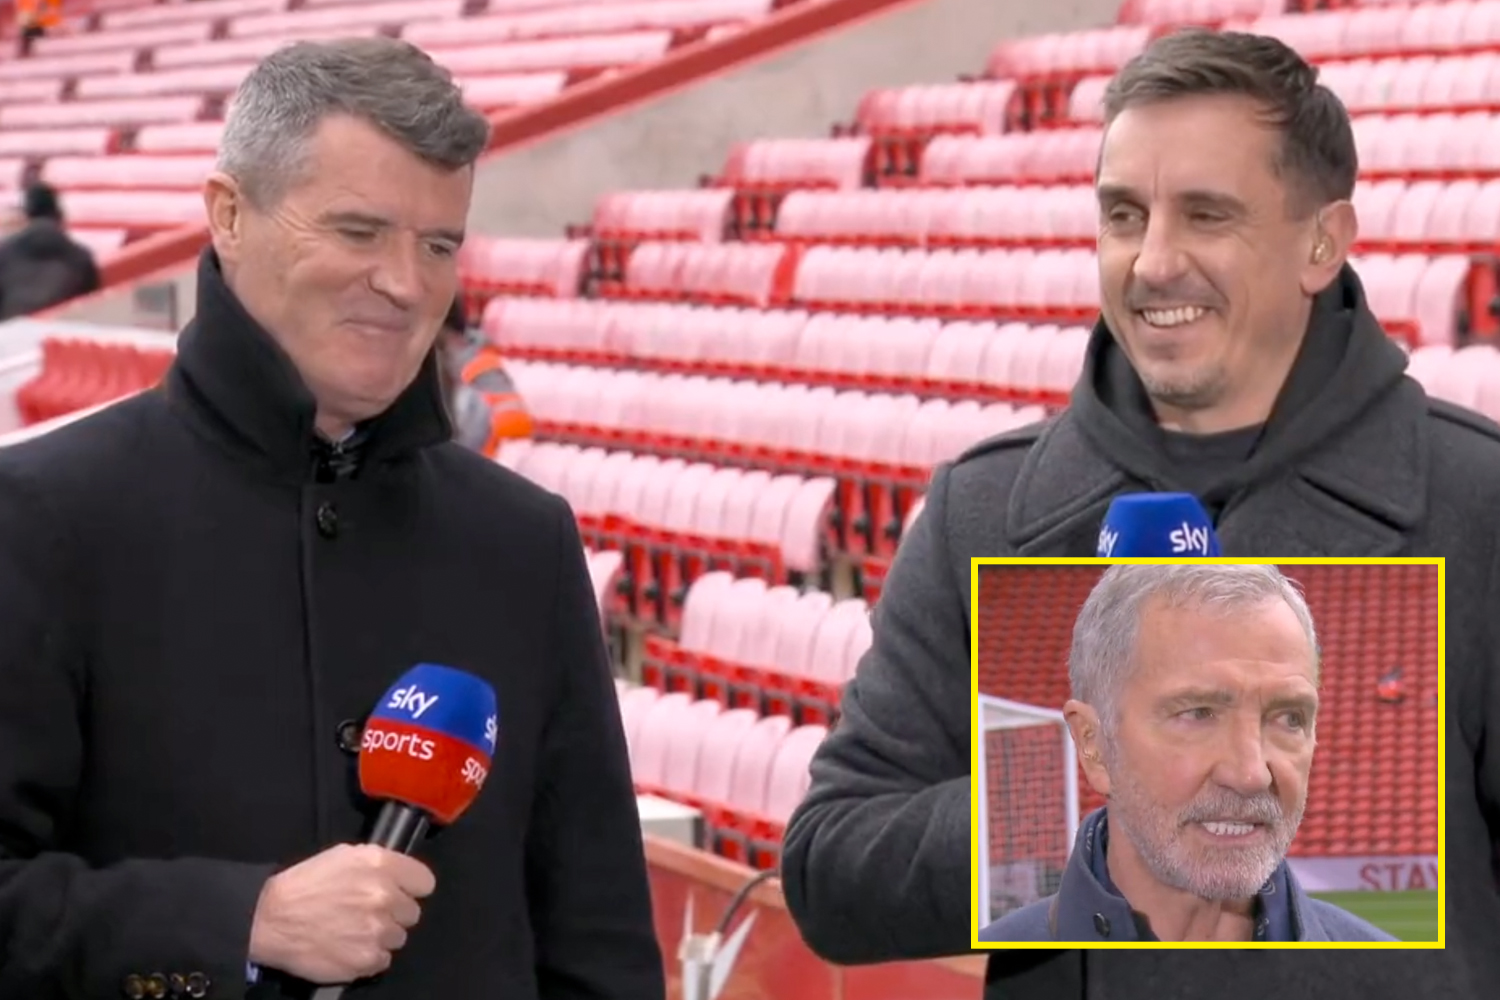 Liverpool legend Graeme Souness has last laugh after Manchester United icons Gary Neville and Roy Keane giggle at his pre-match prediction